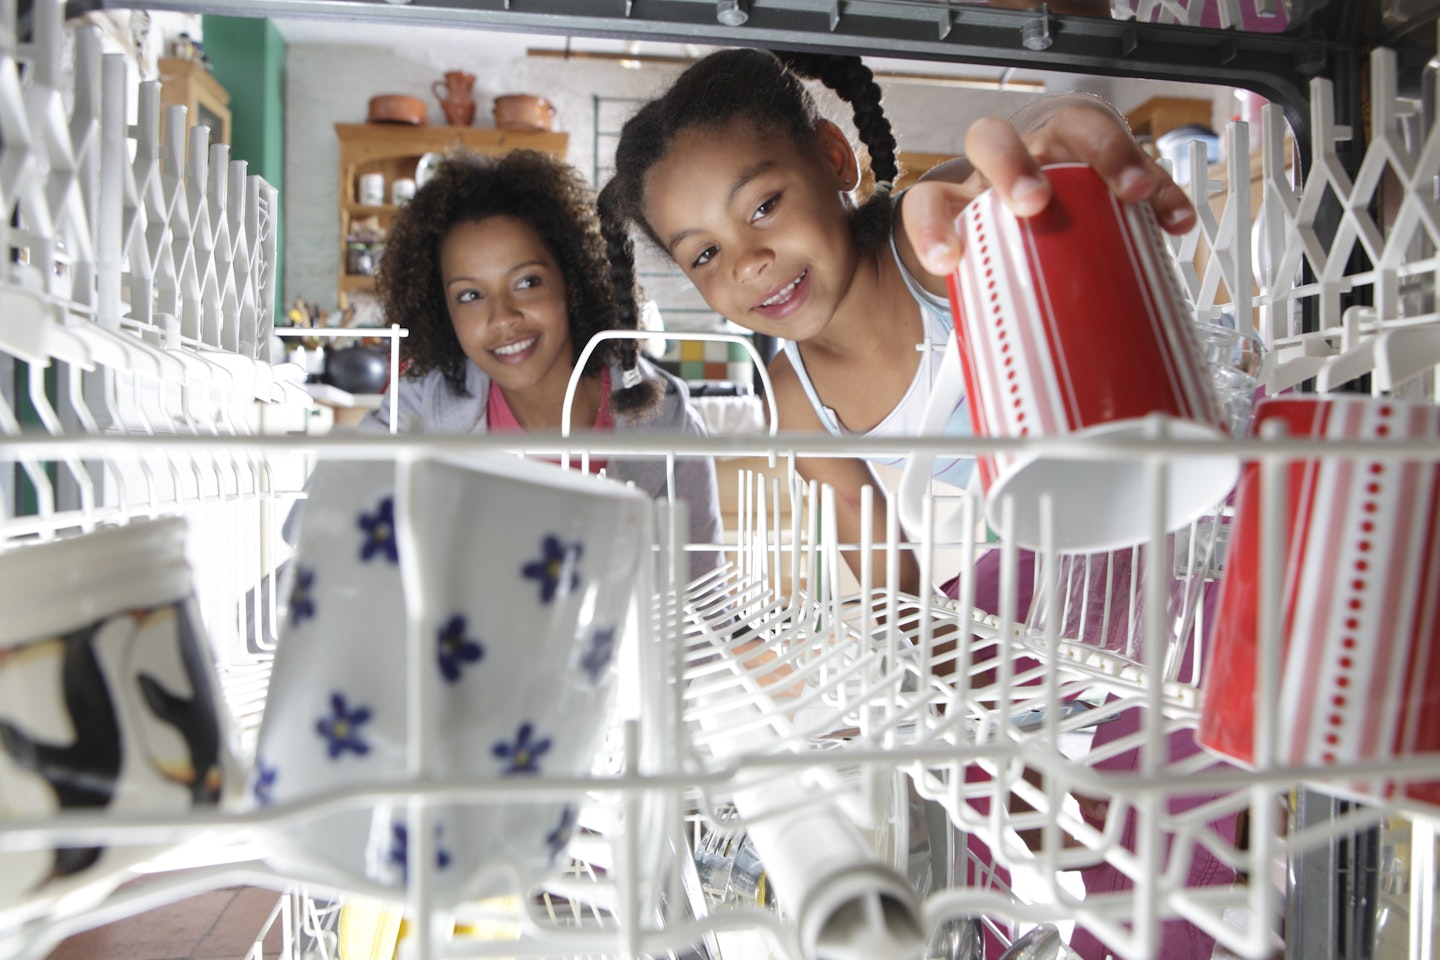 mother and daughter loading dishwasher